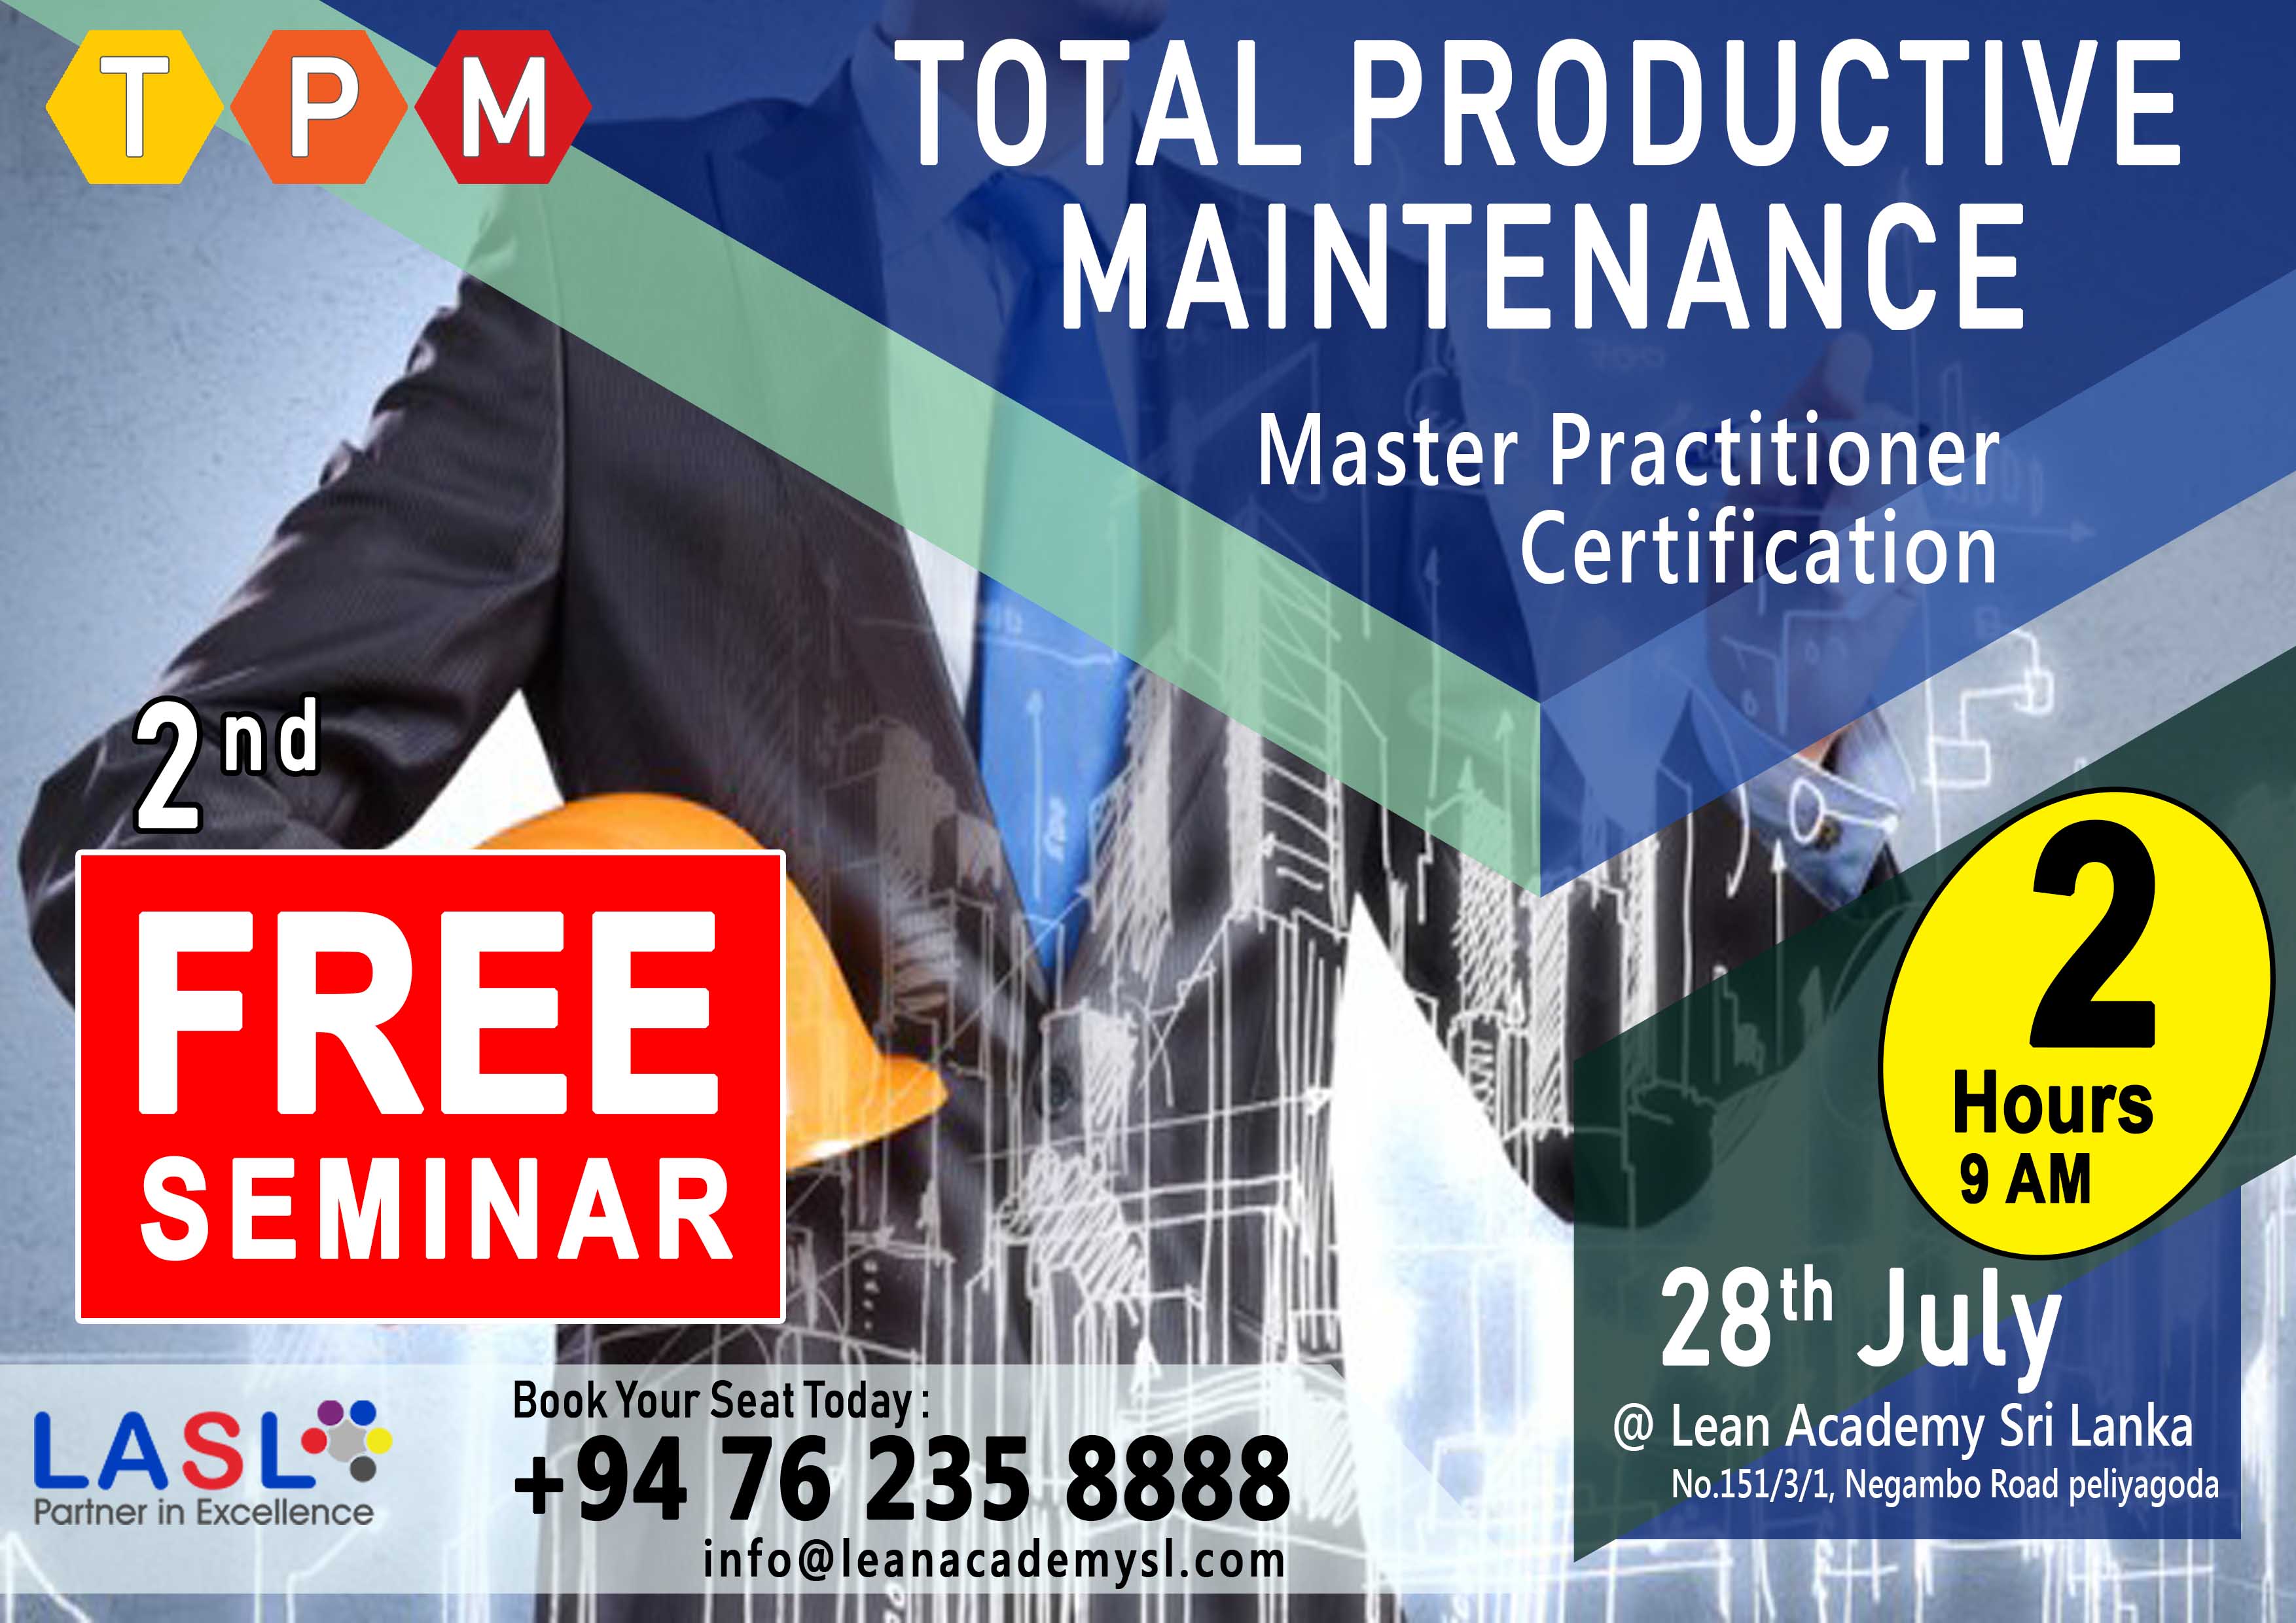 2nd Free Seminar for TPM Master Practitioner Certificate